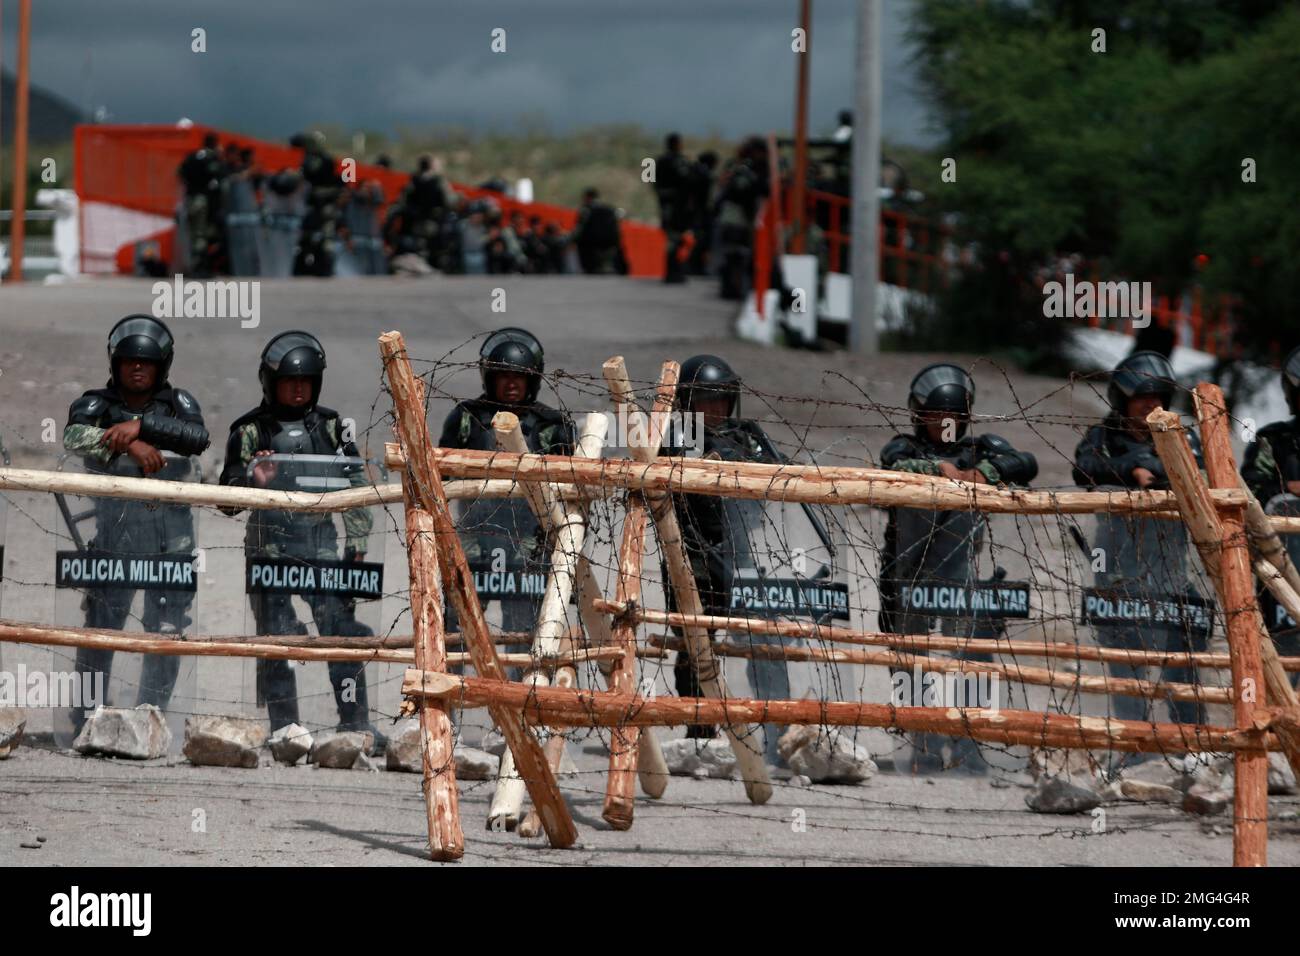 National Guard troops equipped with riot gear stand guard at Las Pilas dam,  two days after withdrawing from nearby La Boquilla dam in clashes with  hundreds of farmers, in Camargo, Chihuahua State